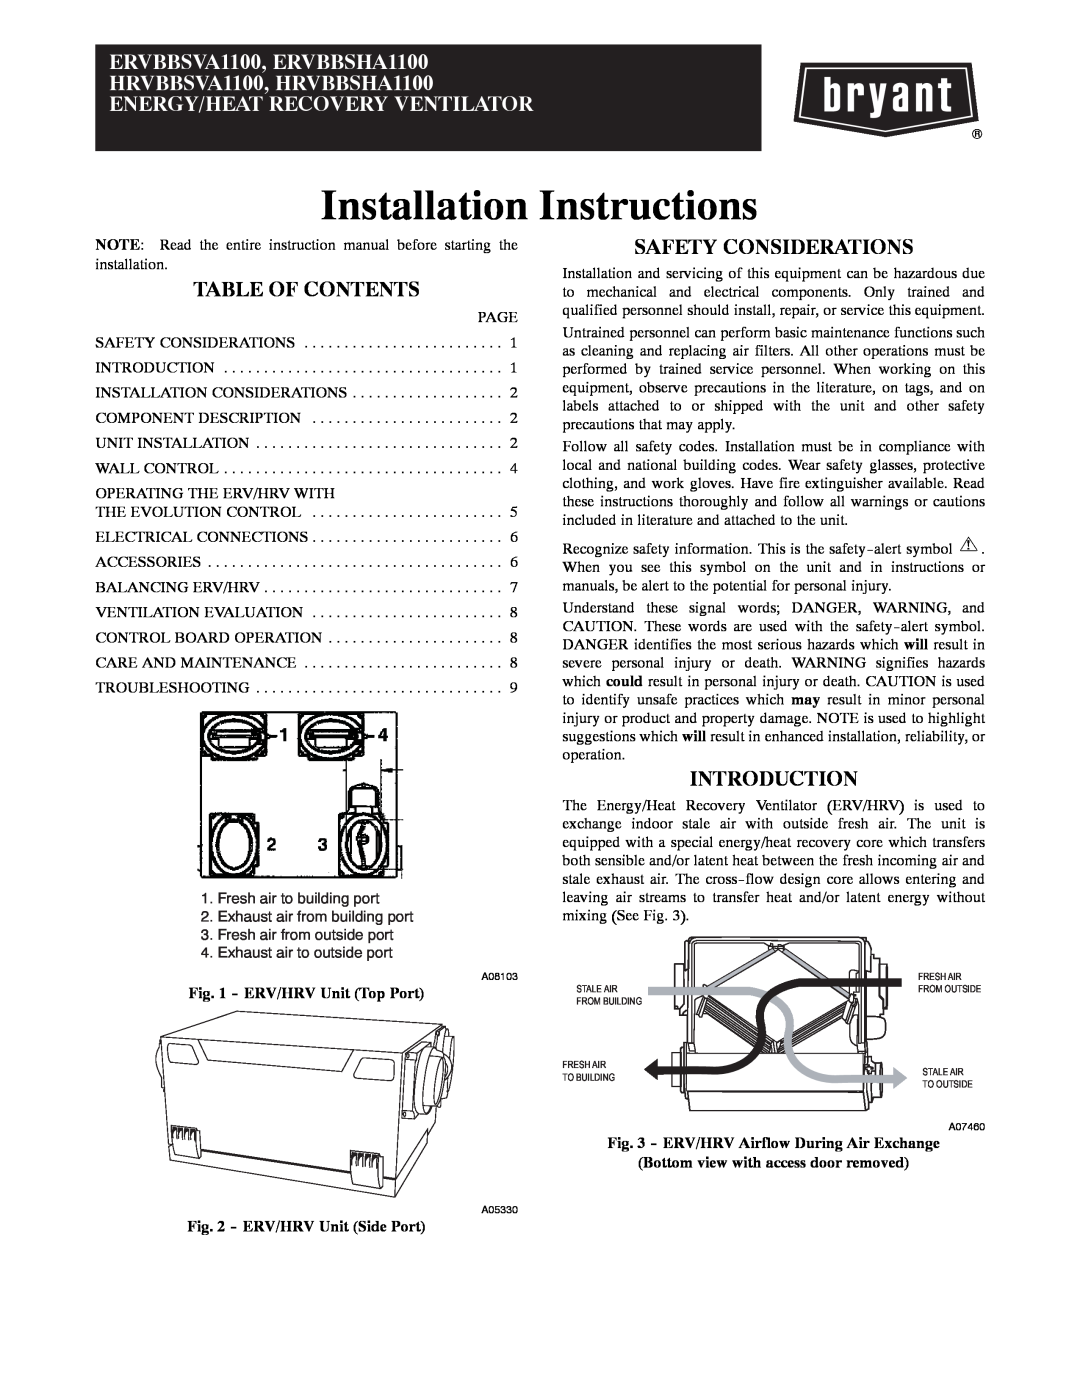 Bryant ERVBBSVA1100 installation instructions Table Of Contents, Safety Considerations, Introduction 